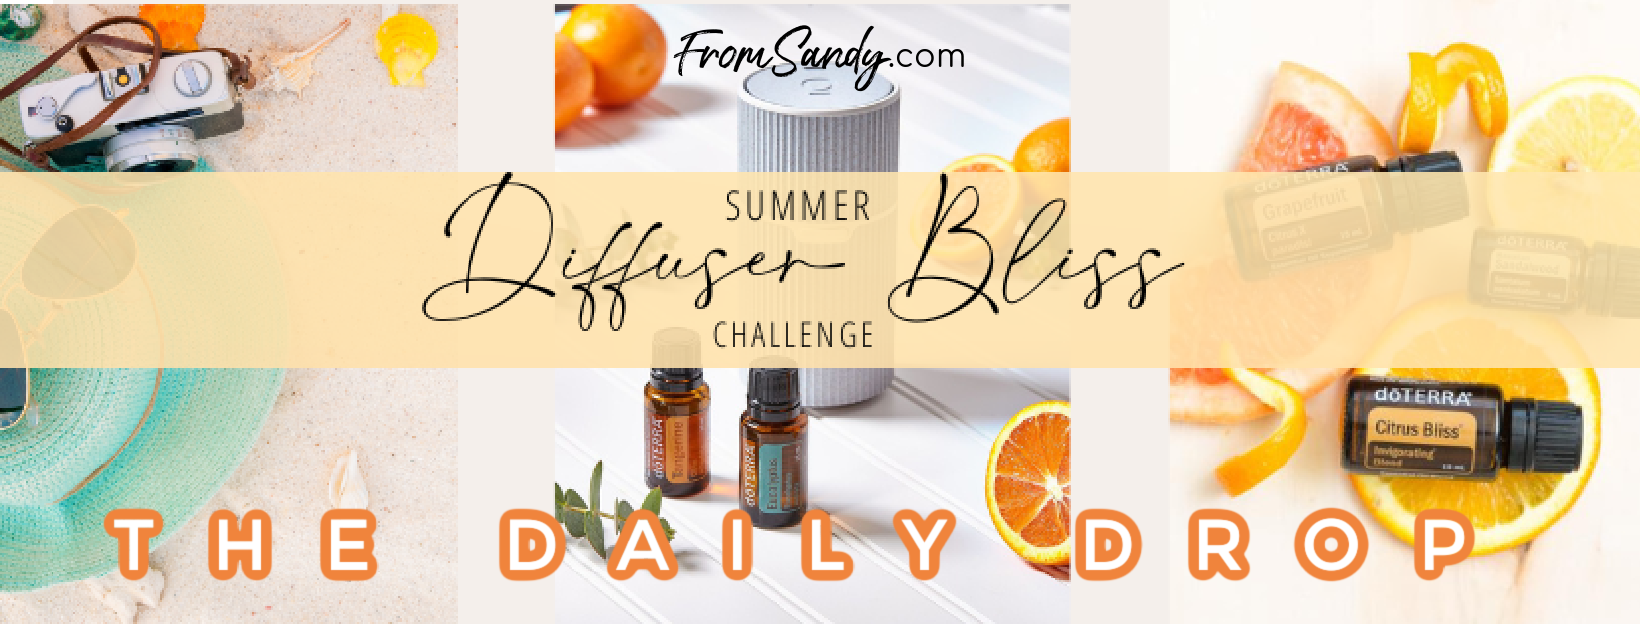 Summer Diffuser Bliss Challenge | From Sandy